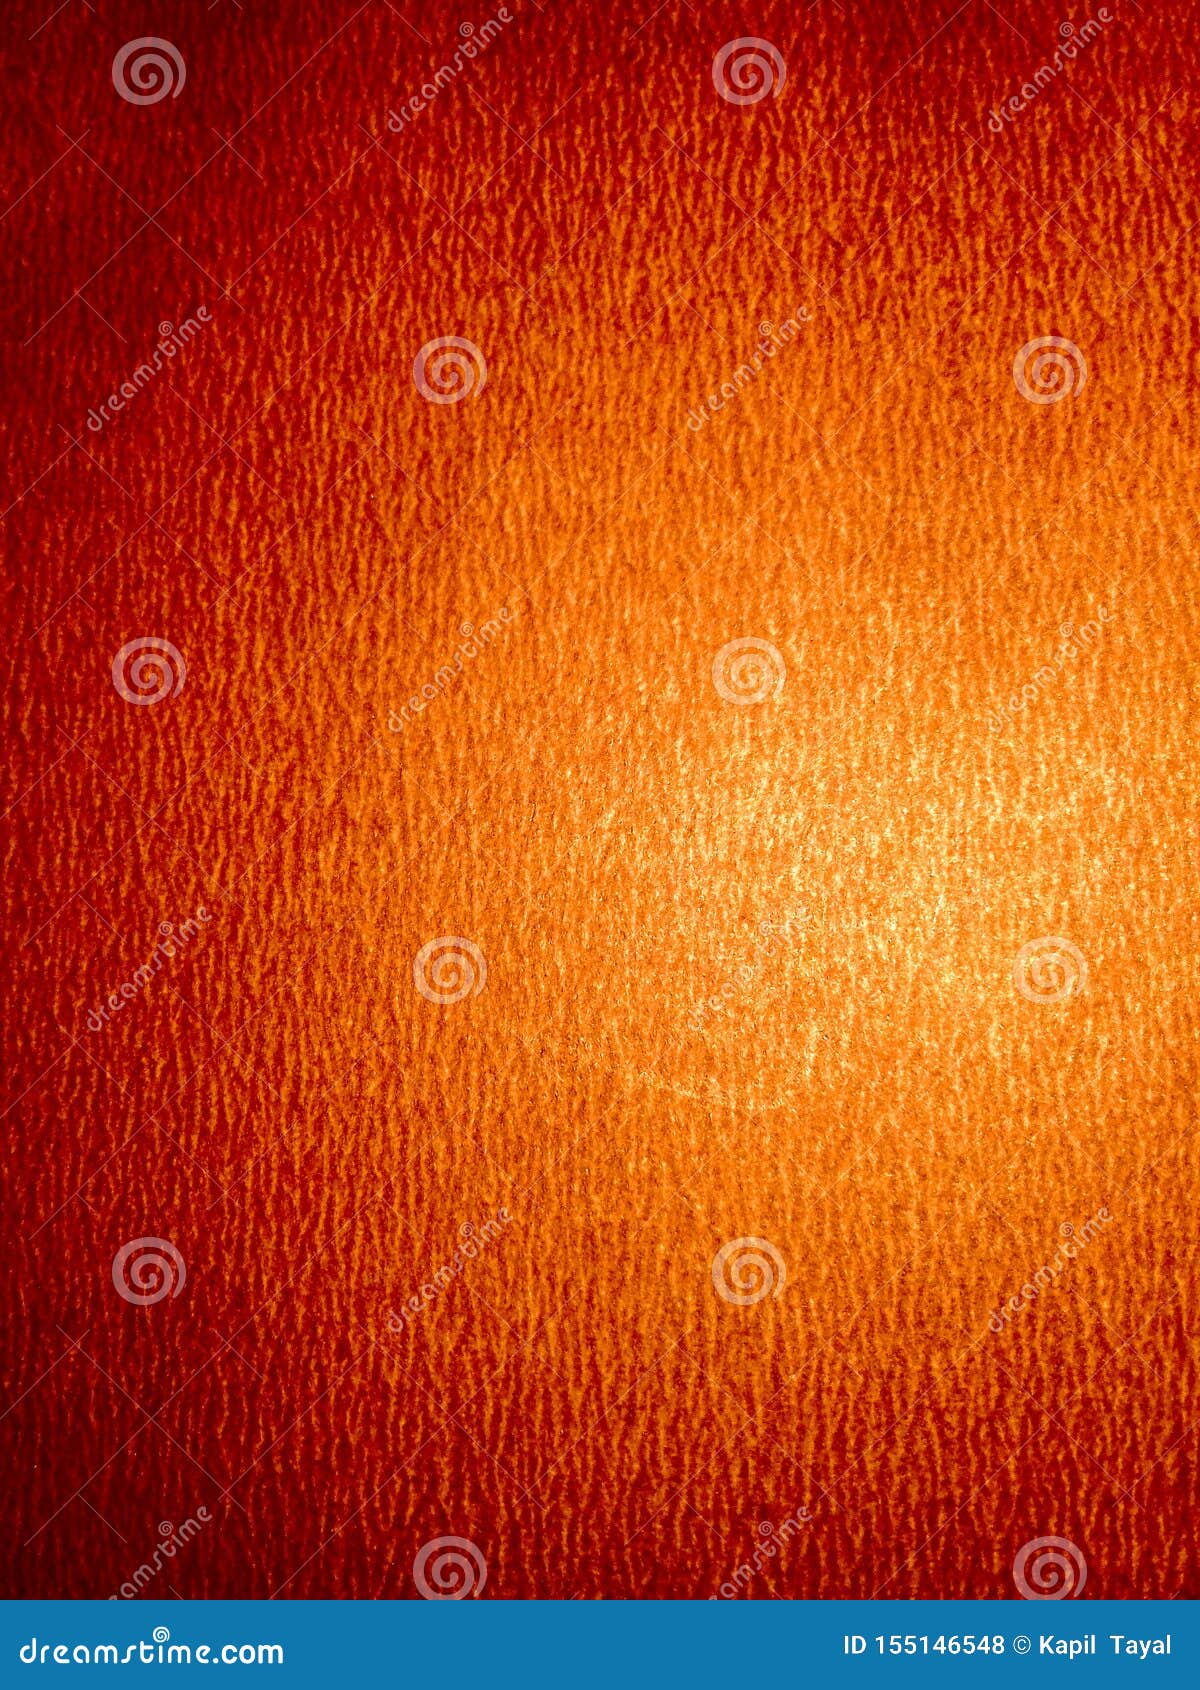 Royal Orange Color Wallpaper Useful Every Where Stock Photo Image Of